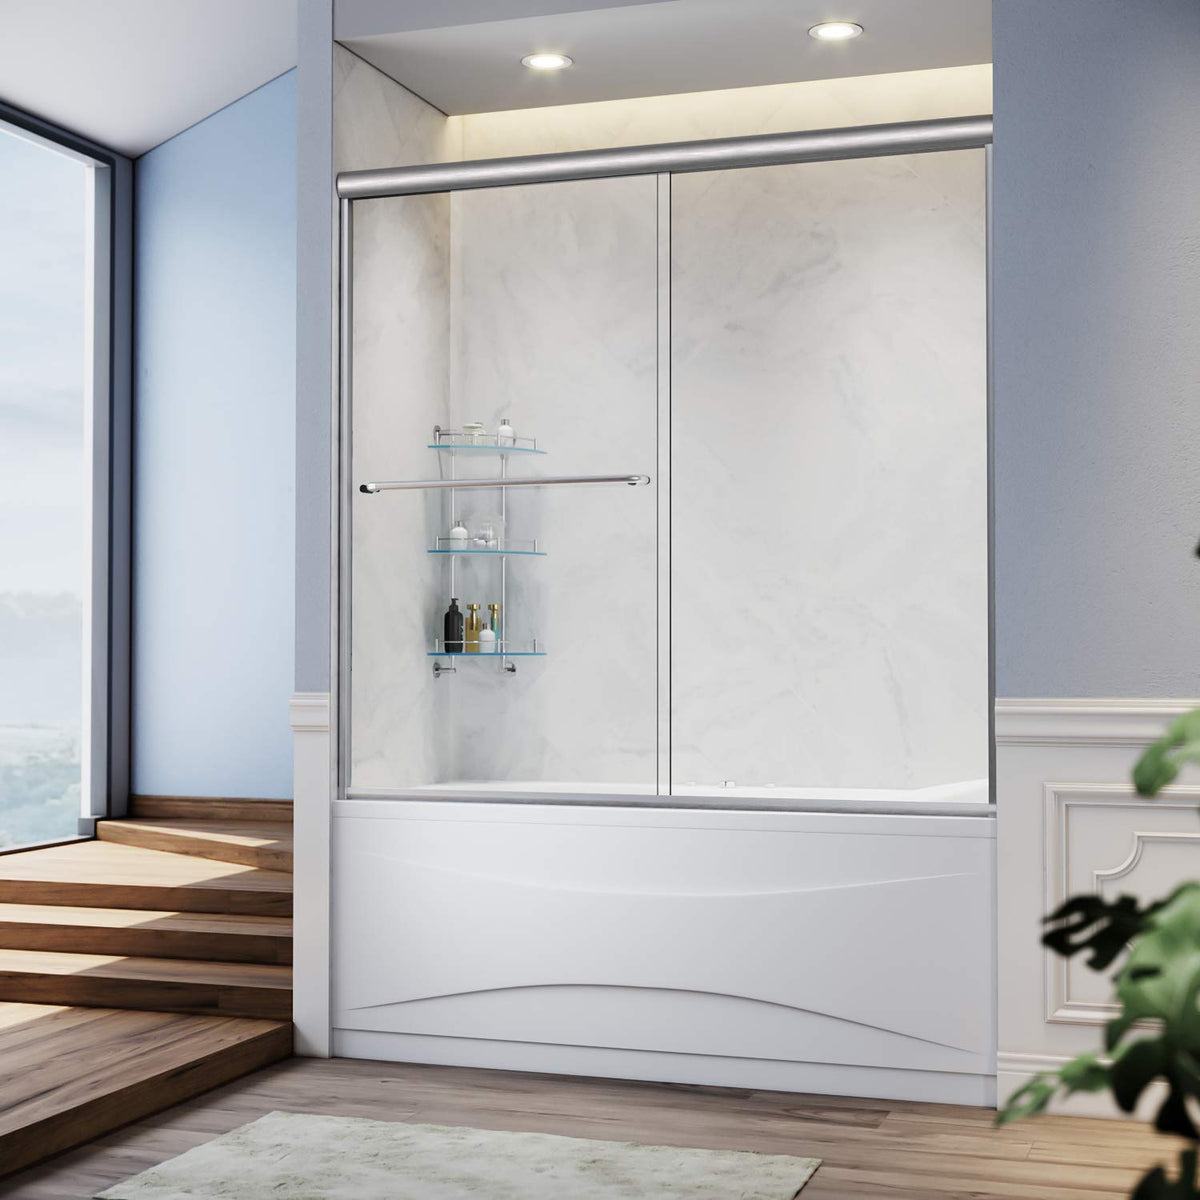 SUNNY SHOWER 60 in. W x 57.4 in. H Brushed Nickel Finish Bathtub Double Sliding Doors - SUNNY SHOWER